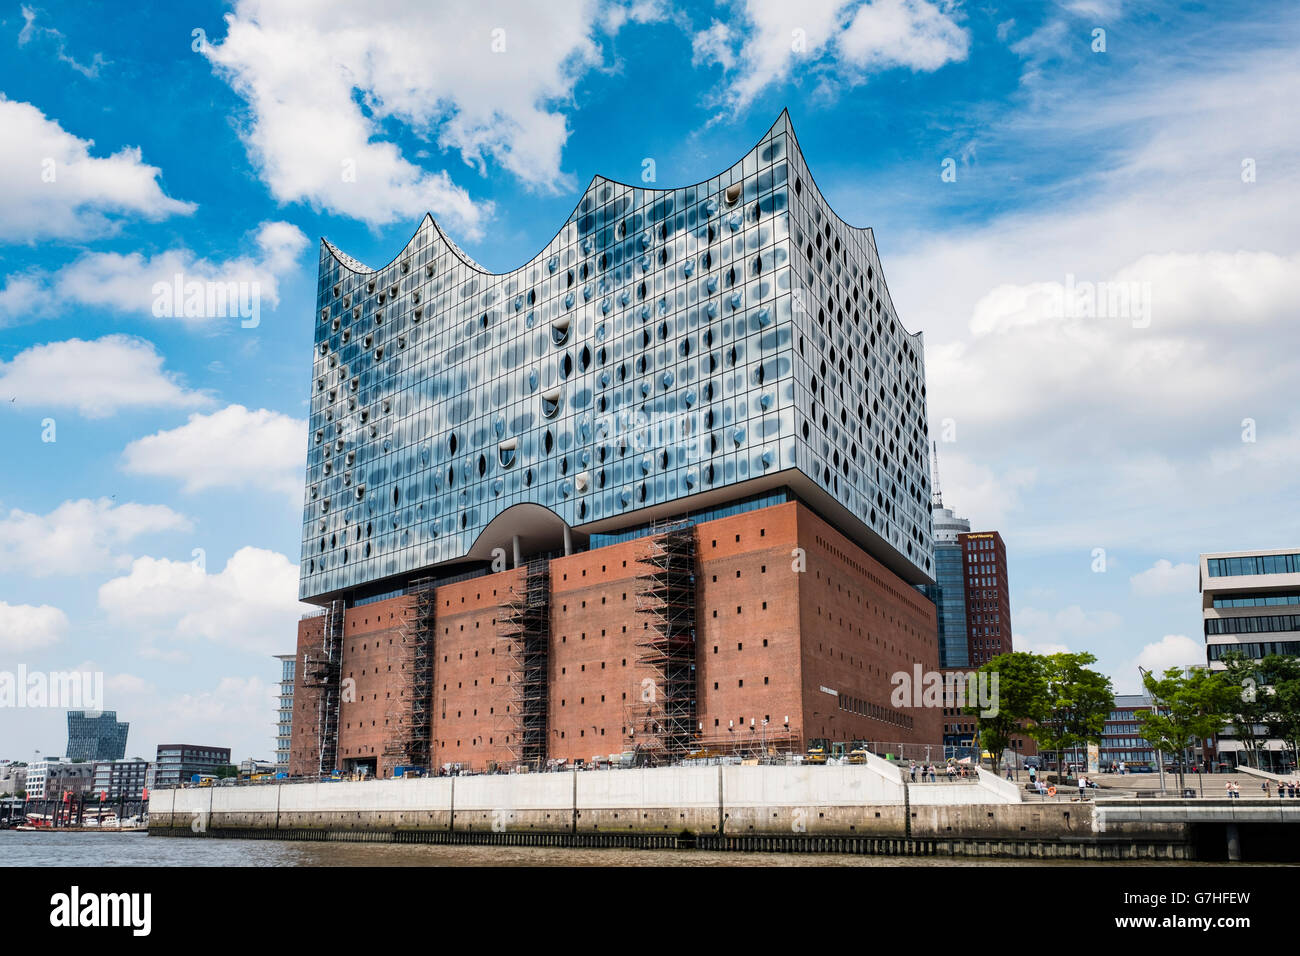 View of new Elbphilharmonie concert hall nearing completion on River Elbe in Hamburg Germany Stock Photo